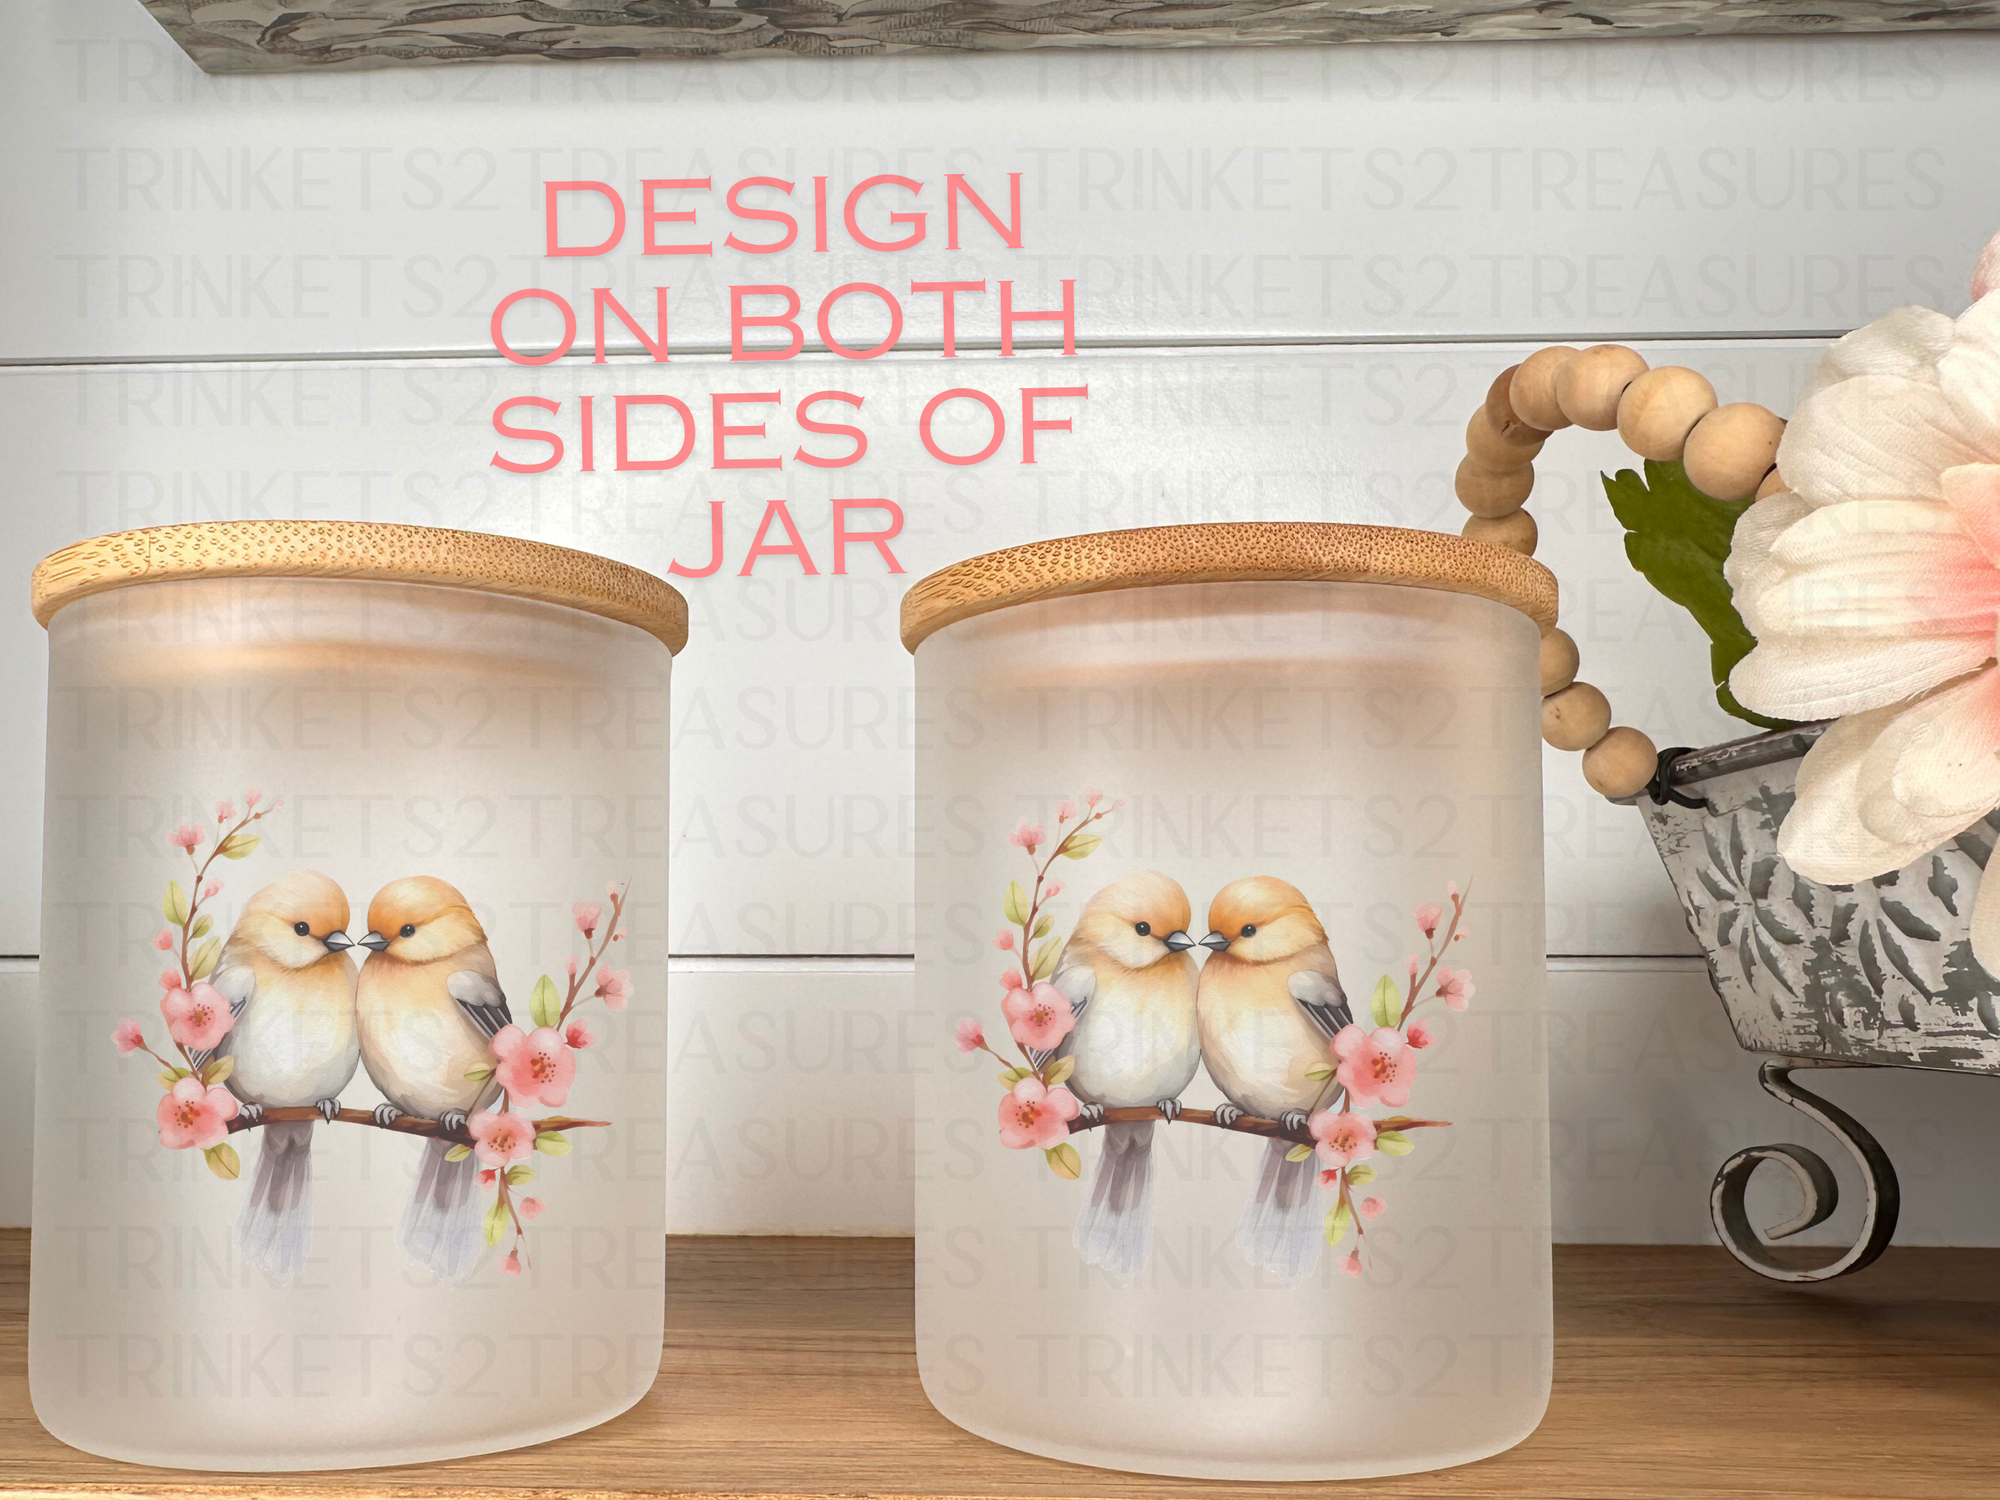 10 oz Frosted Candle Jars with Bamboo Lid/Multi-Purpose Jar/Love Birds/#511